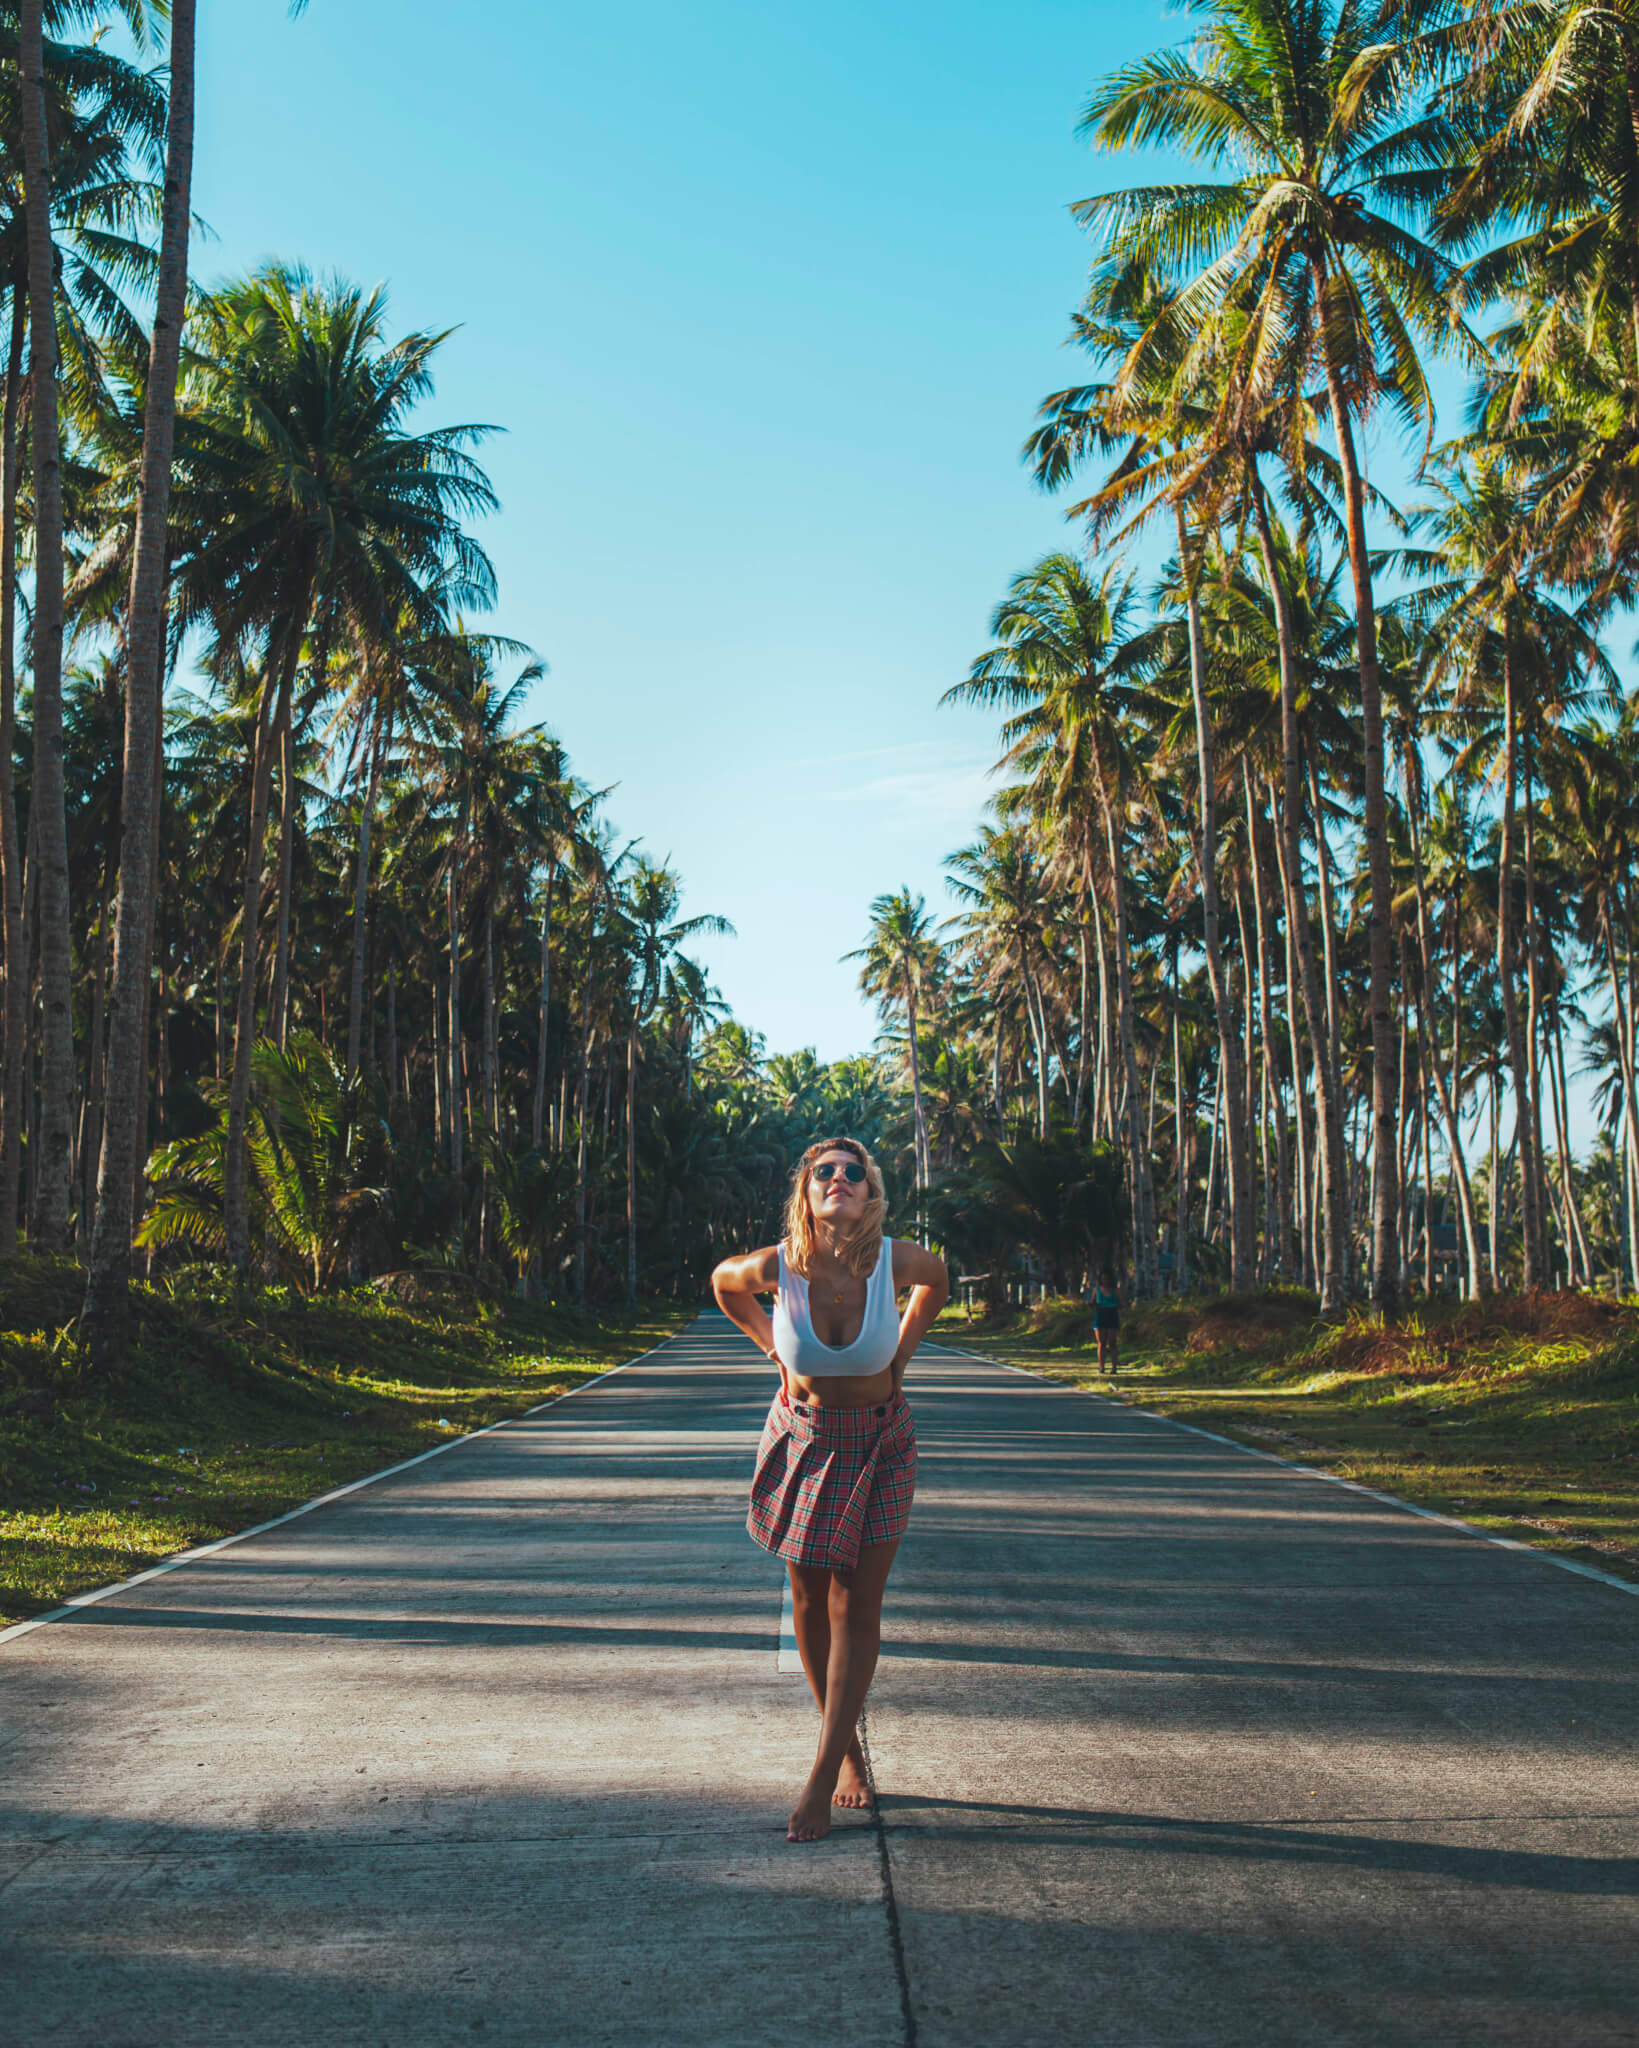 7-reasons-to-visit-Siargao-Philippines-10-of-24 7 reasons to visit Siargao Island in the Philippines